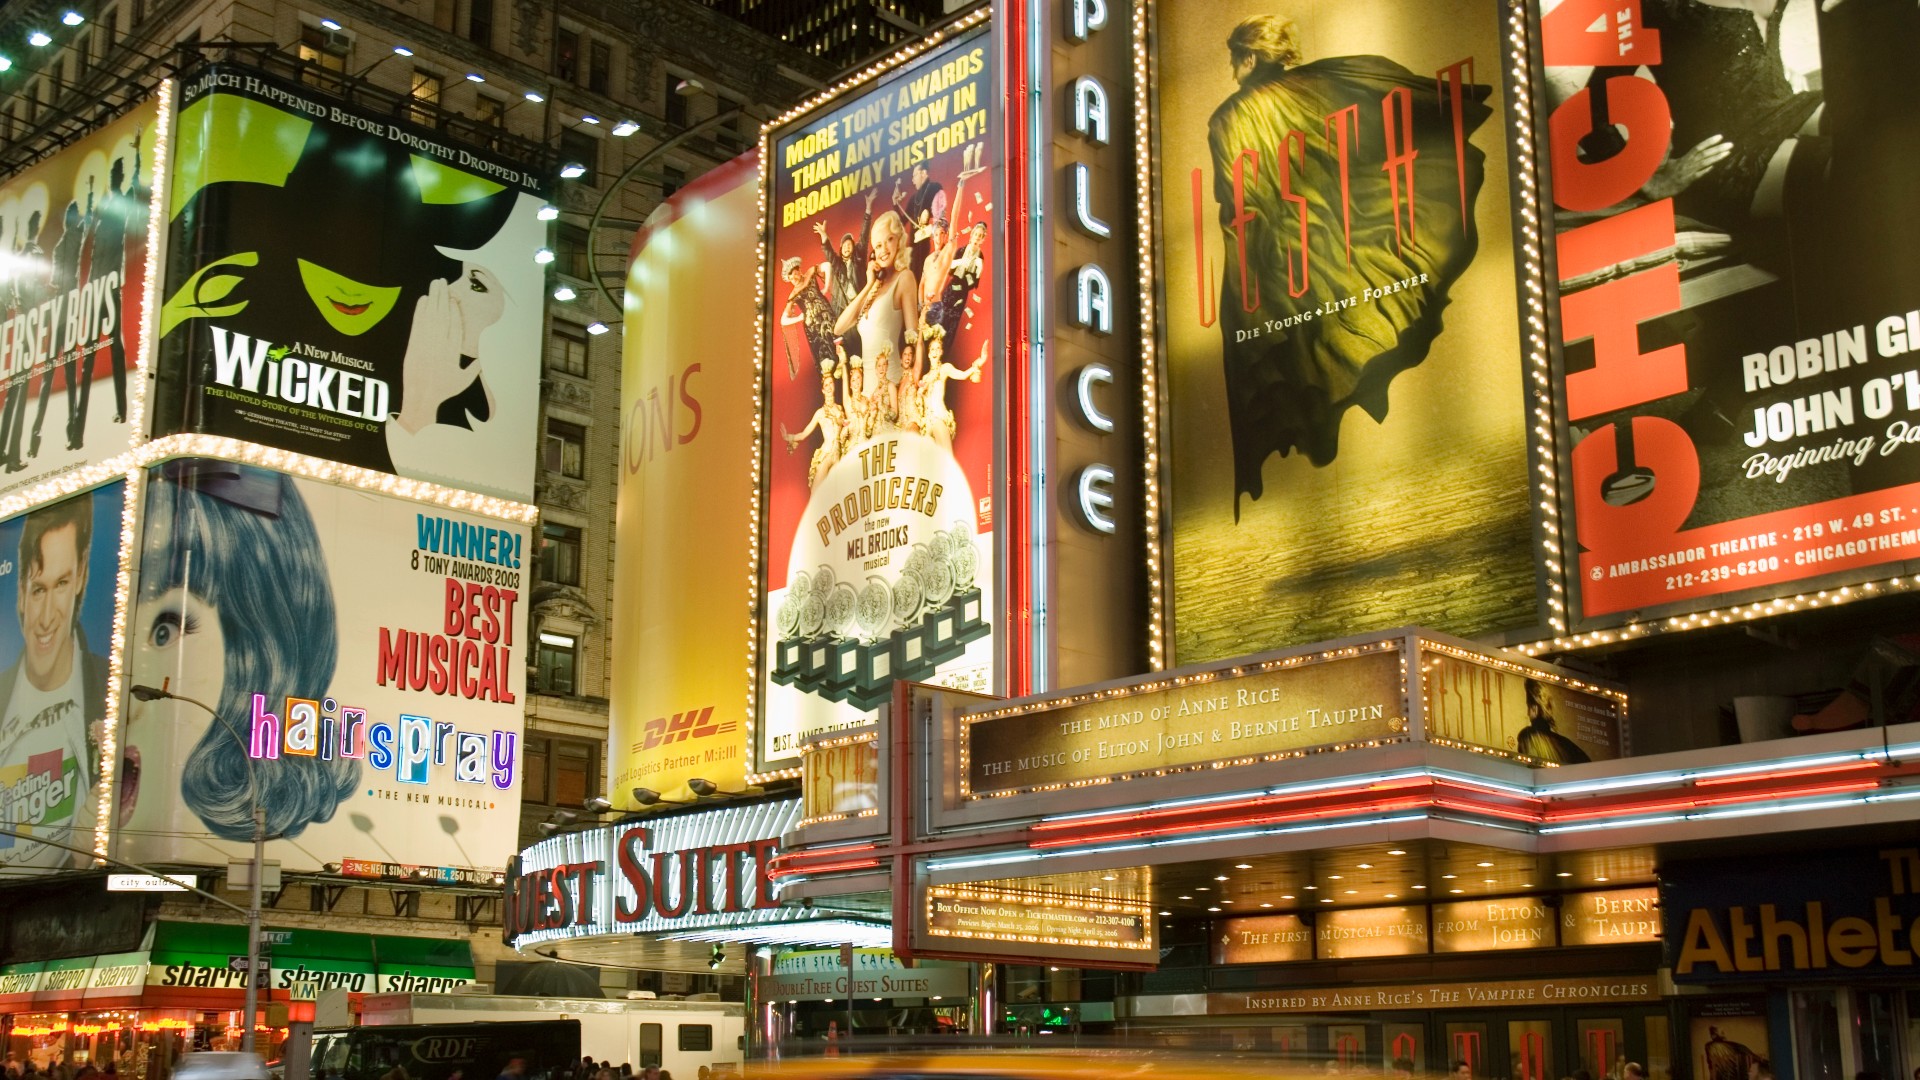 A view of the famous American Broadway theater scene